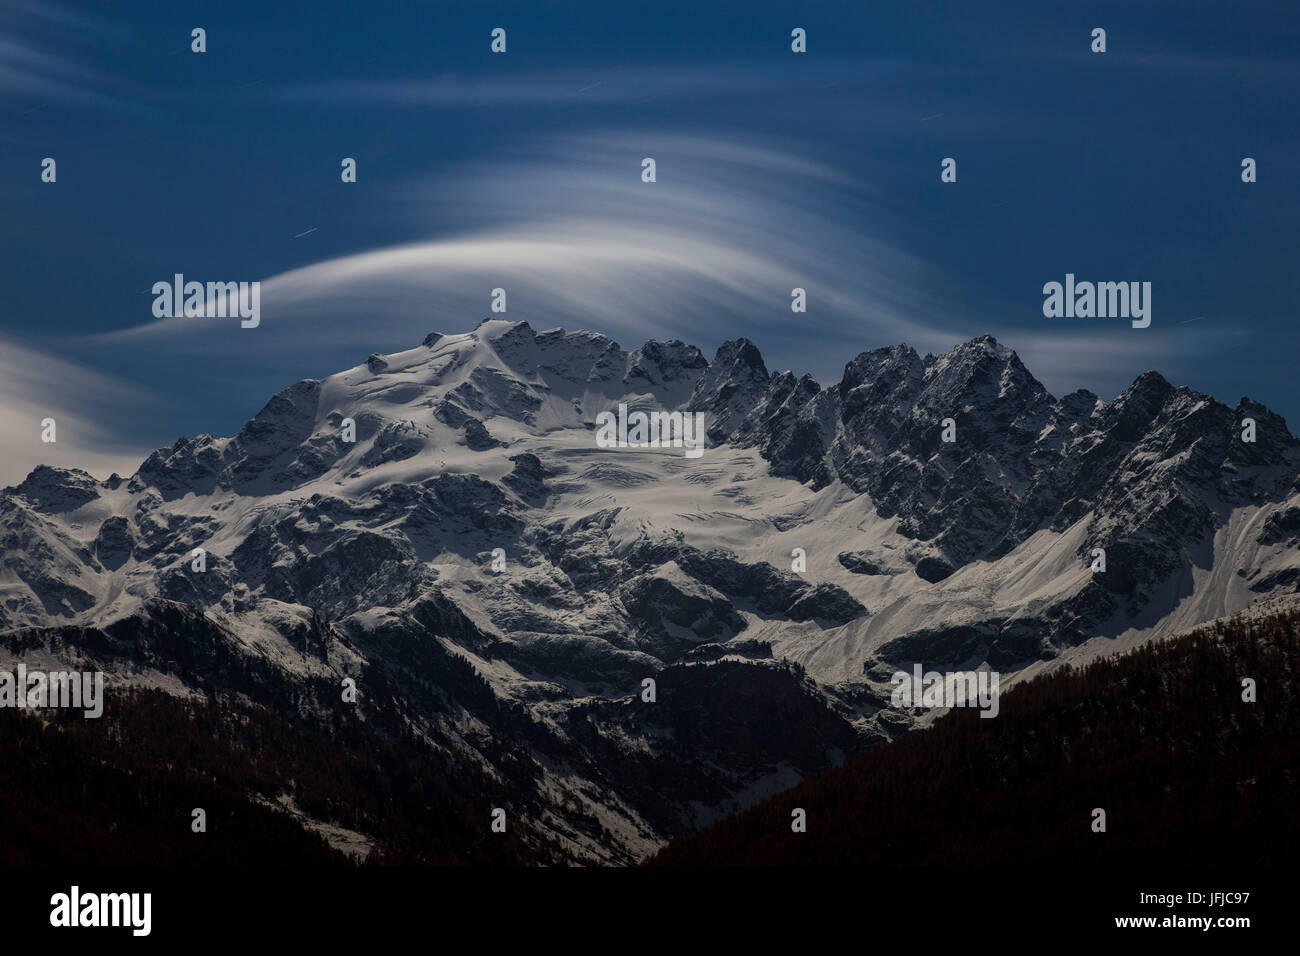 Europe, Italy, Lombardy, Valtellina, Cima Piazzi nightscape during a full moon night Stock Photo